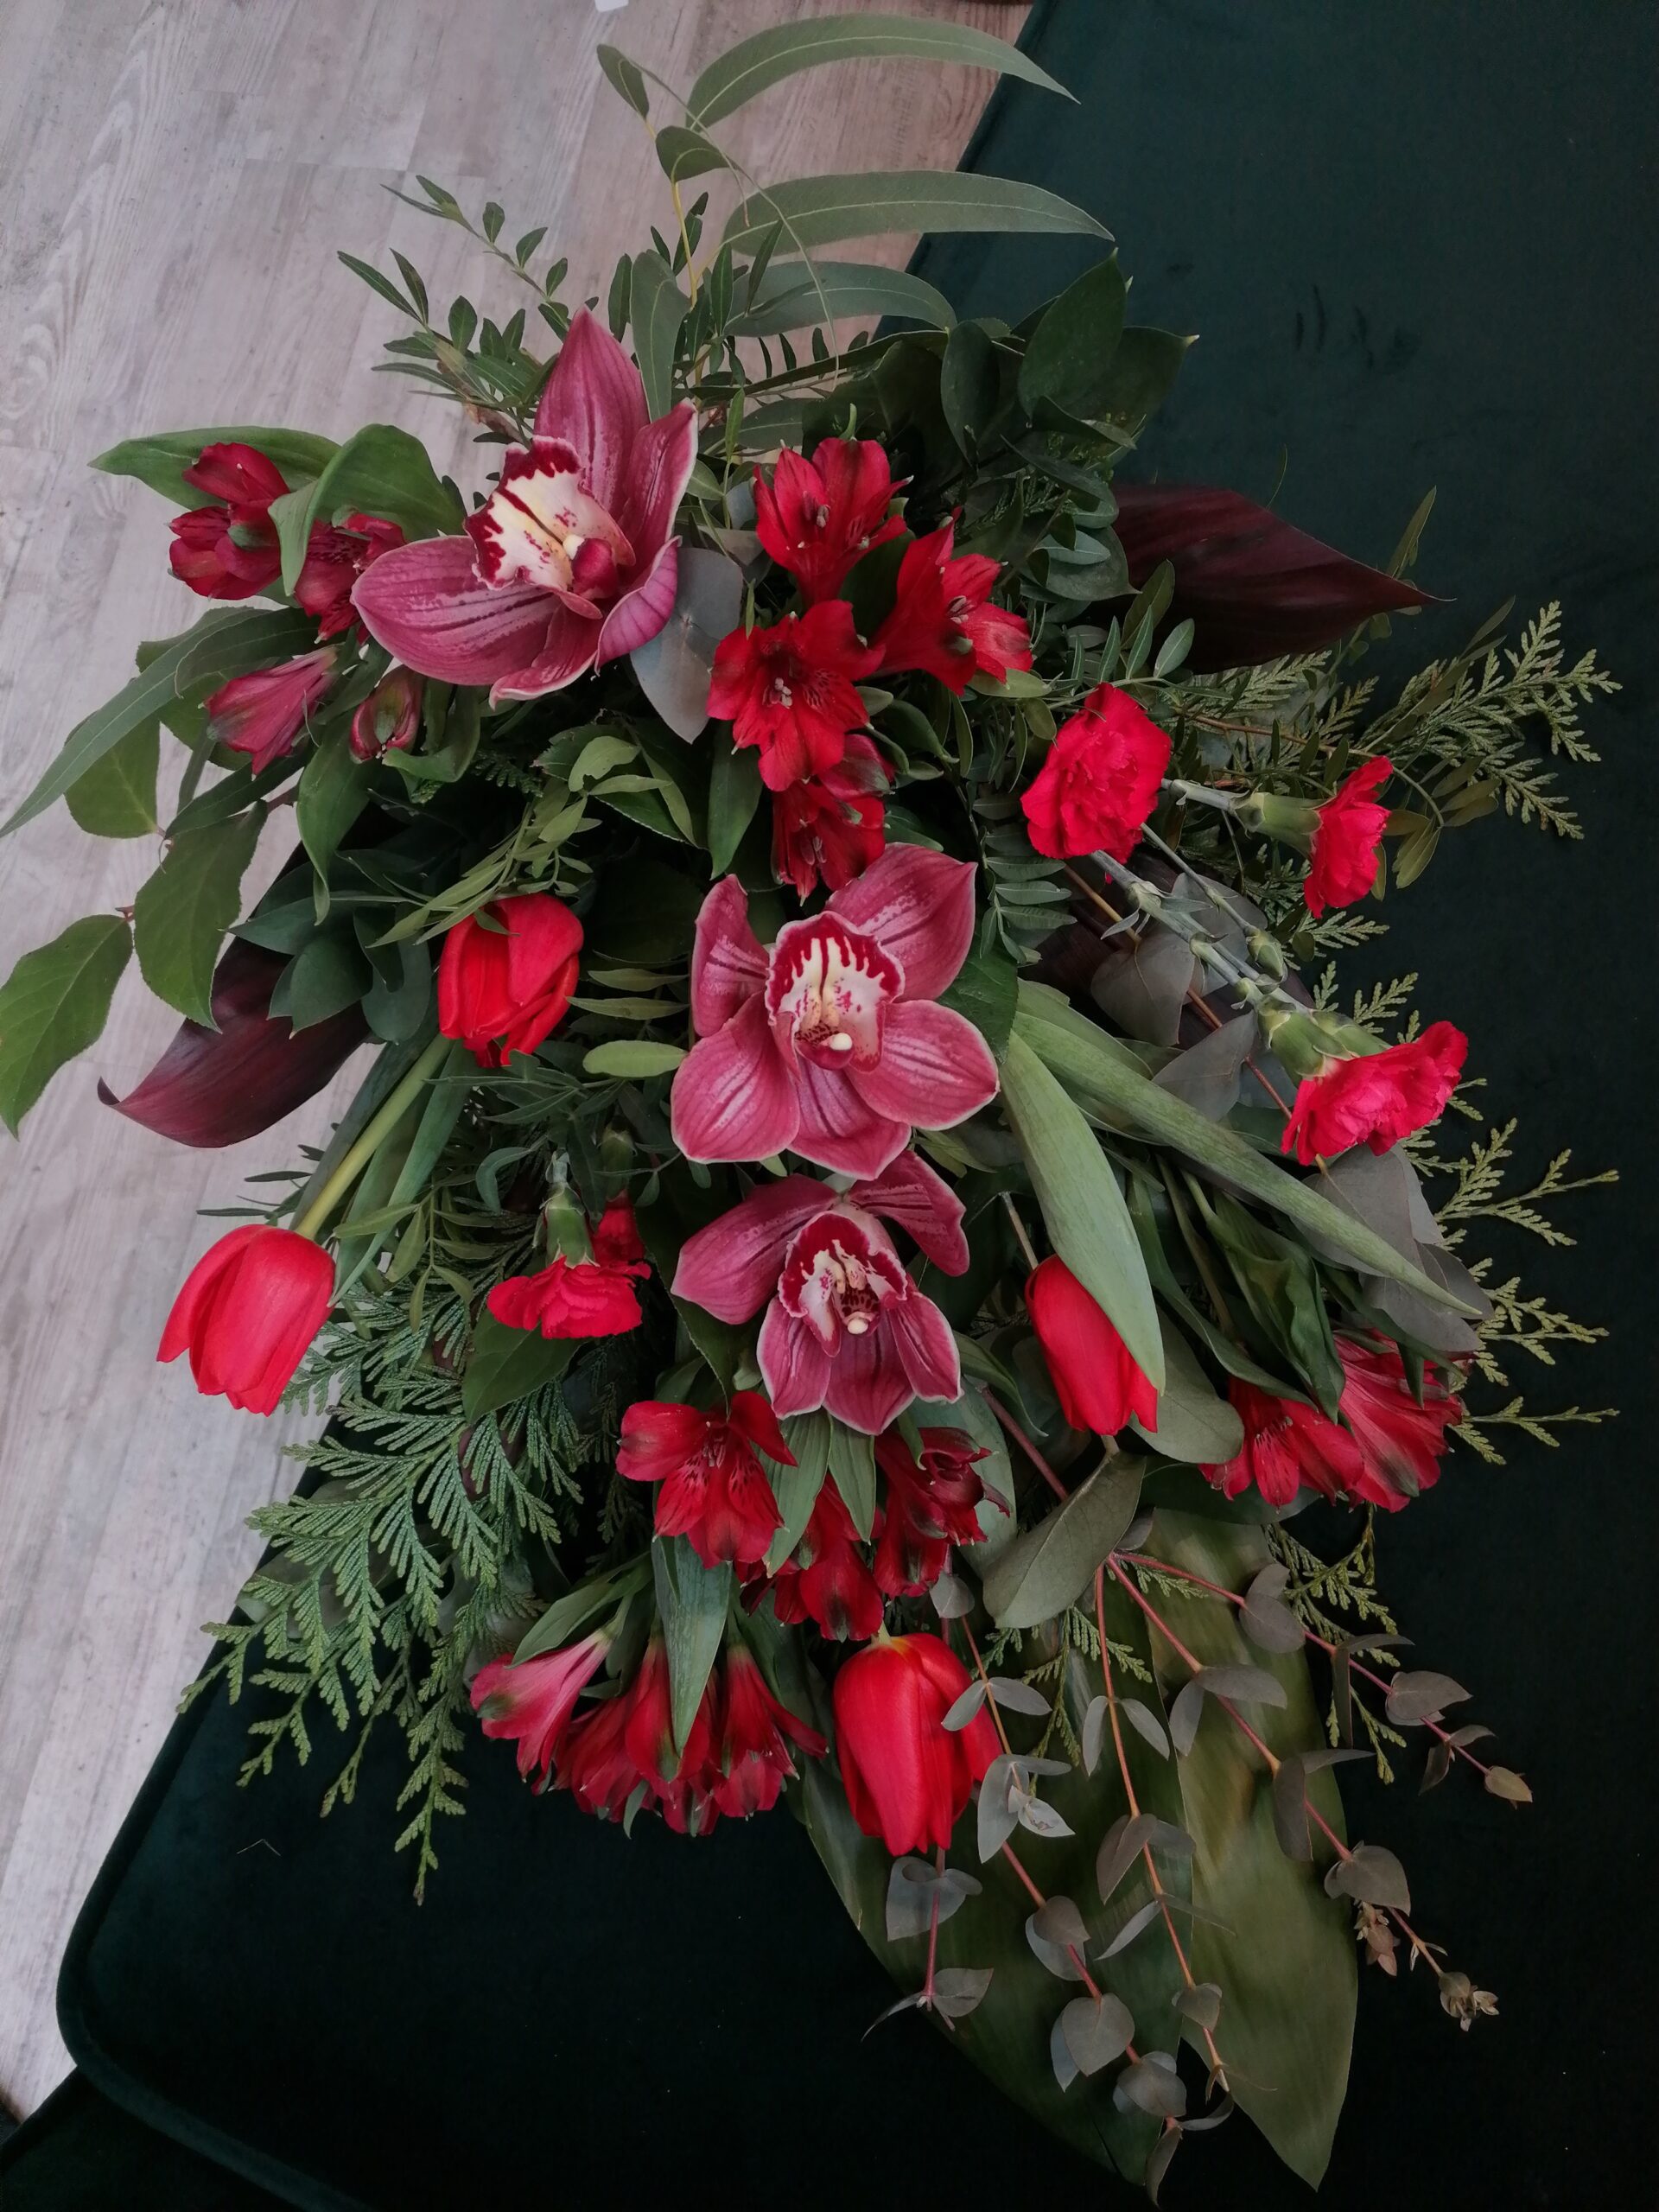 The bouquet in red is an elegant farewell bouquet for both men and women. It consists of orchids, tulips, alstroemeria and carnations surrounded by assorted greenery.